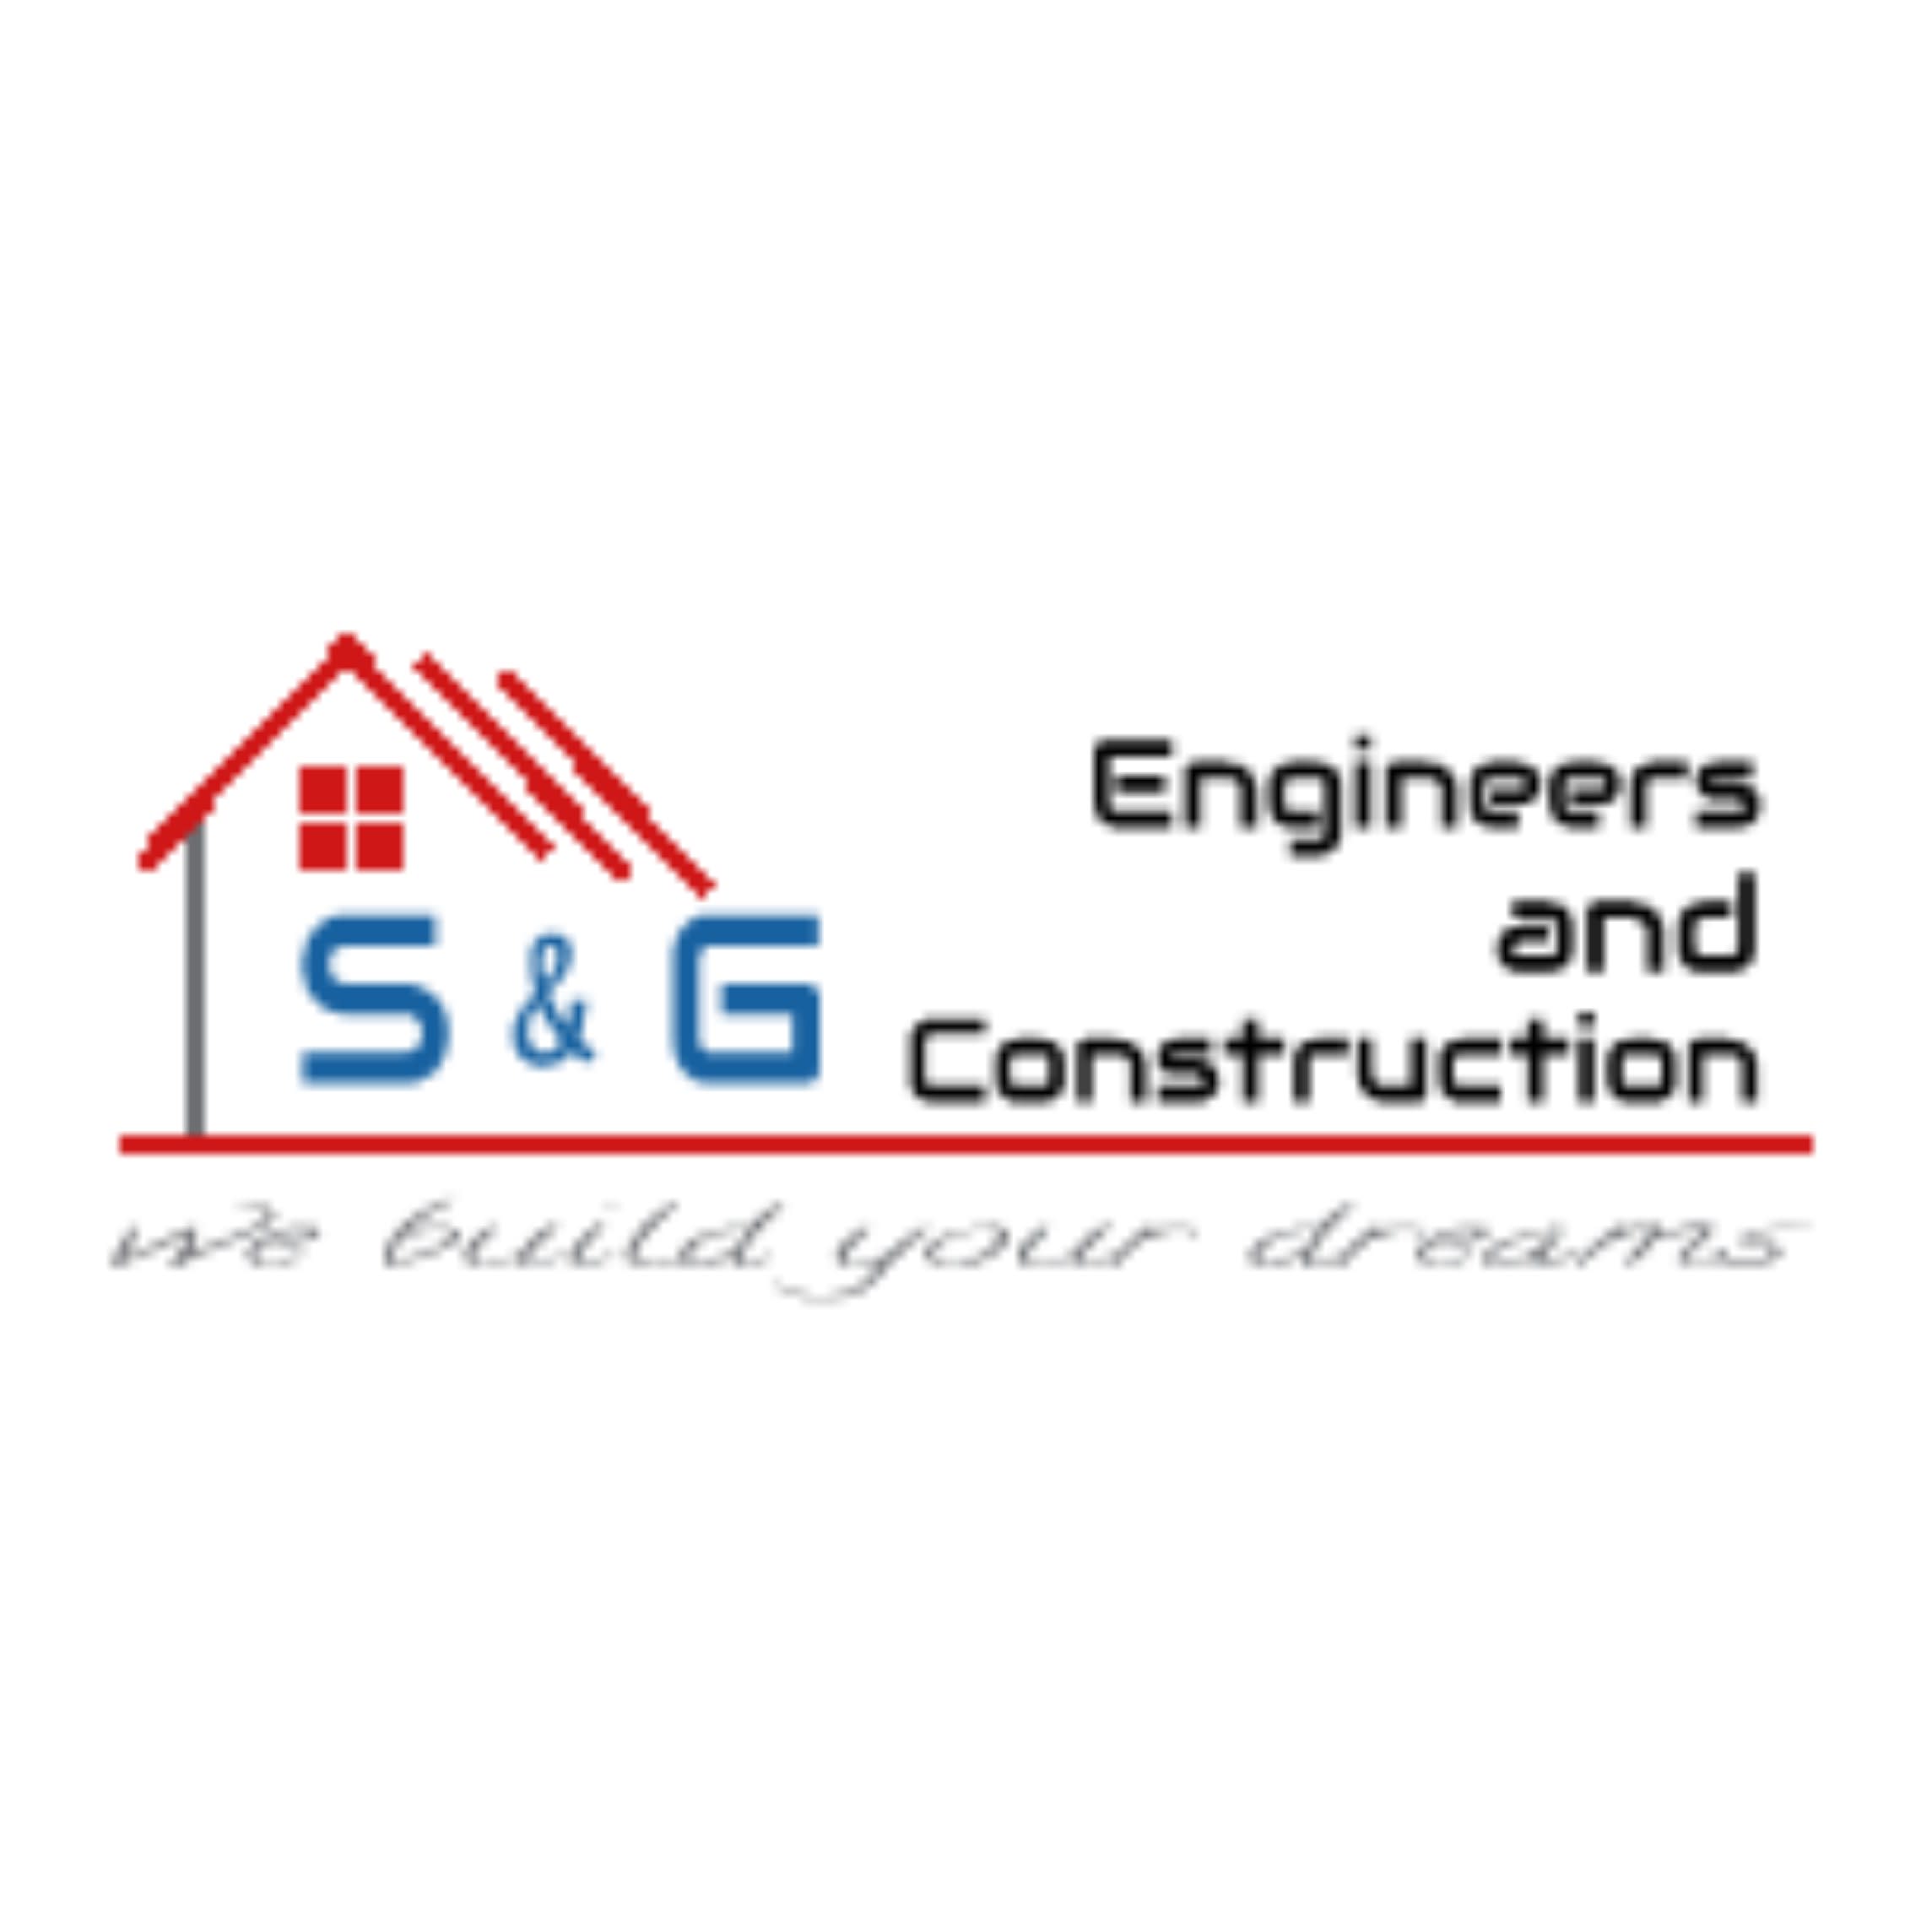 S&G Engineer and Construction